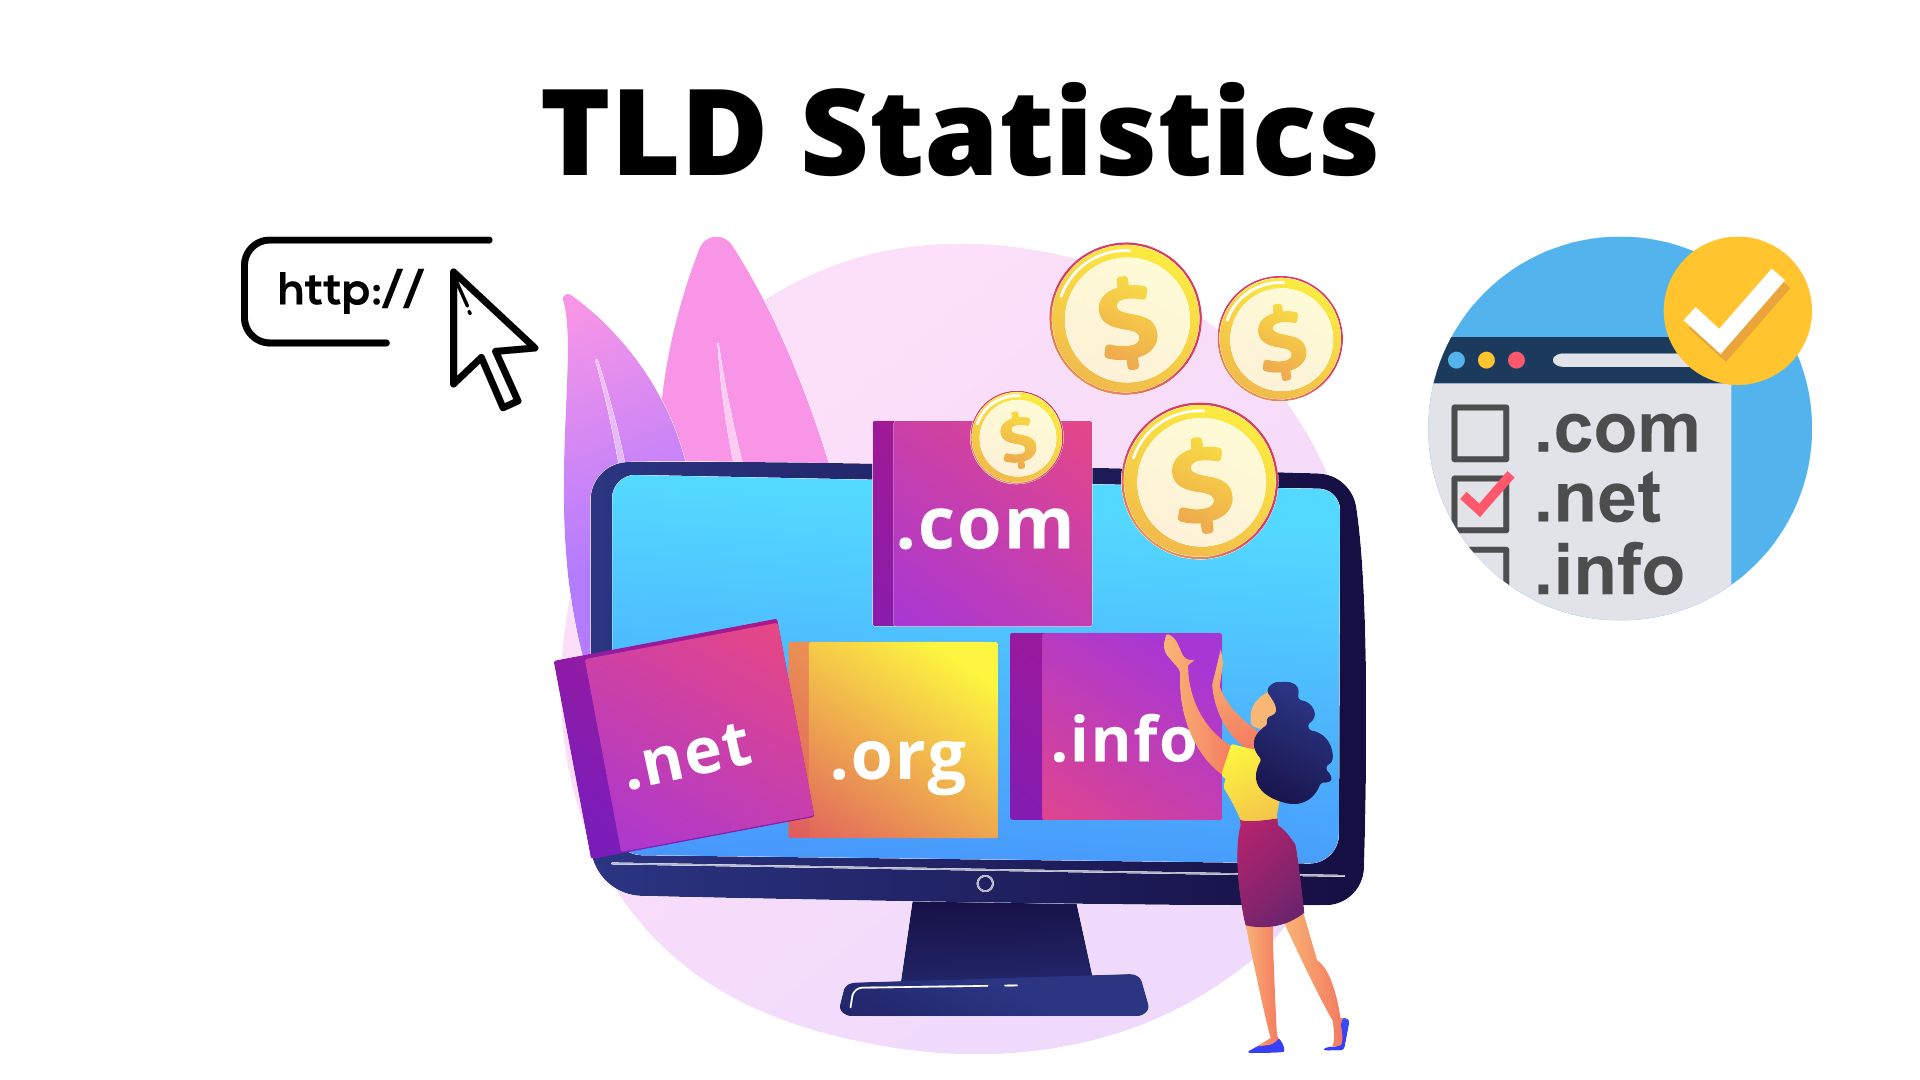 TLD Statistics 2022 - Top-Level Domain, Growth and